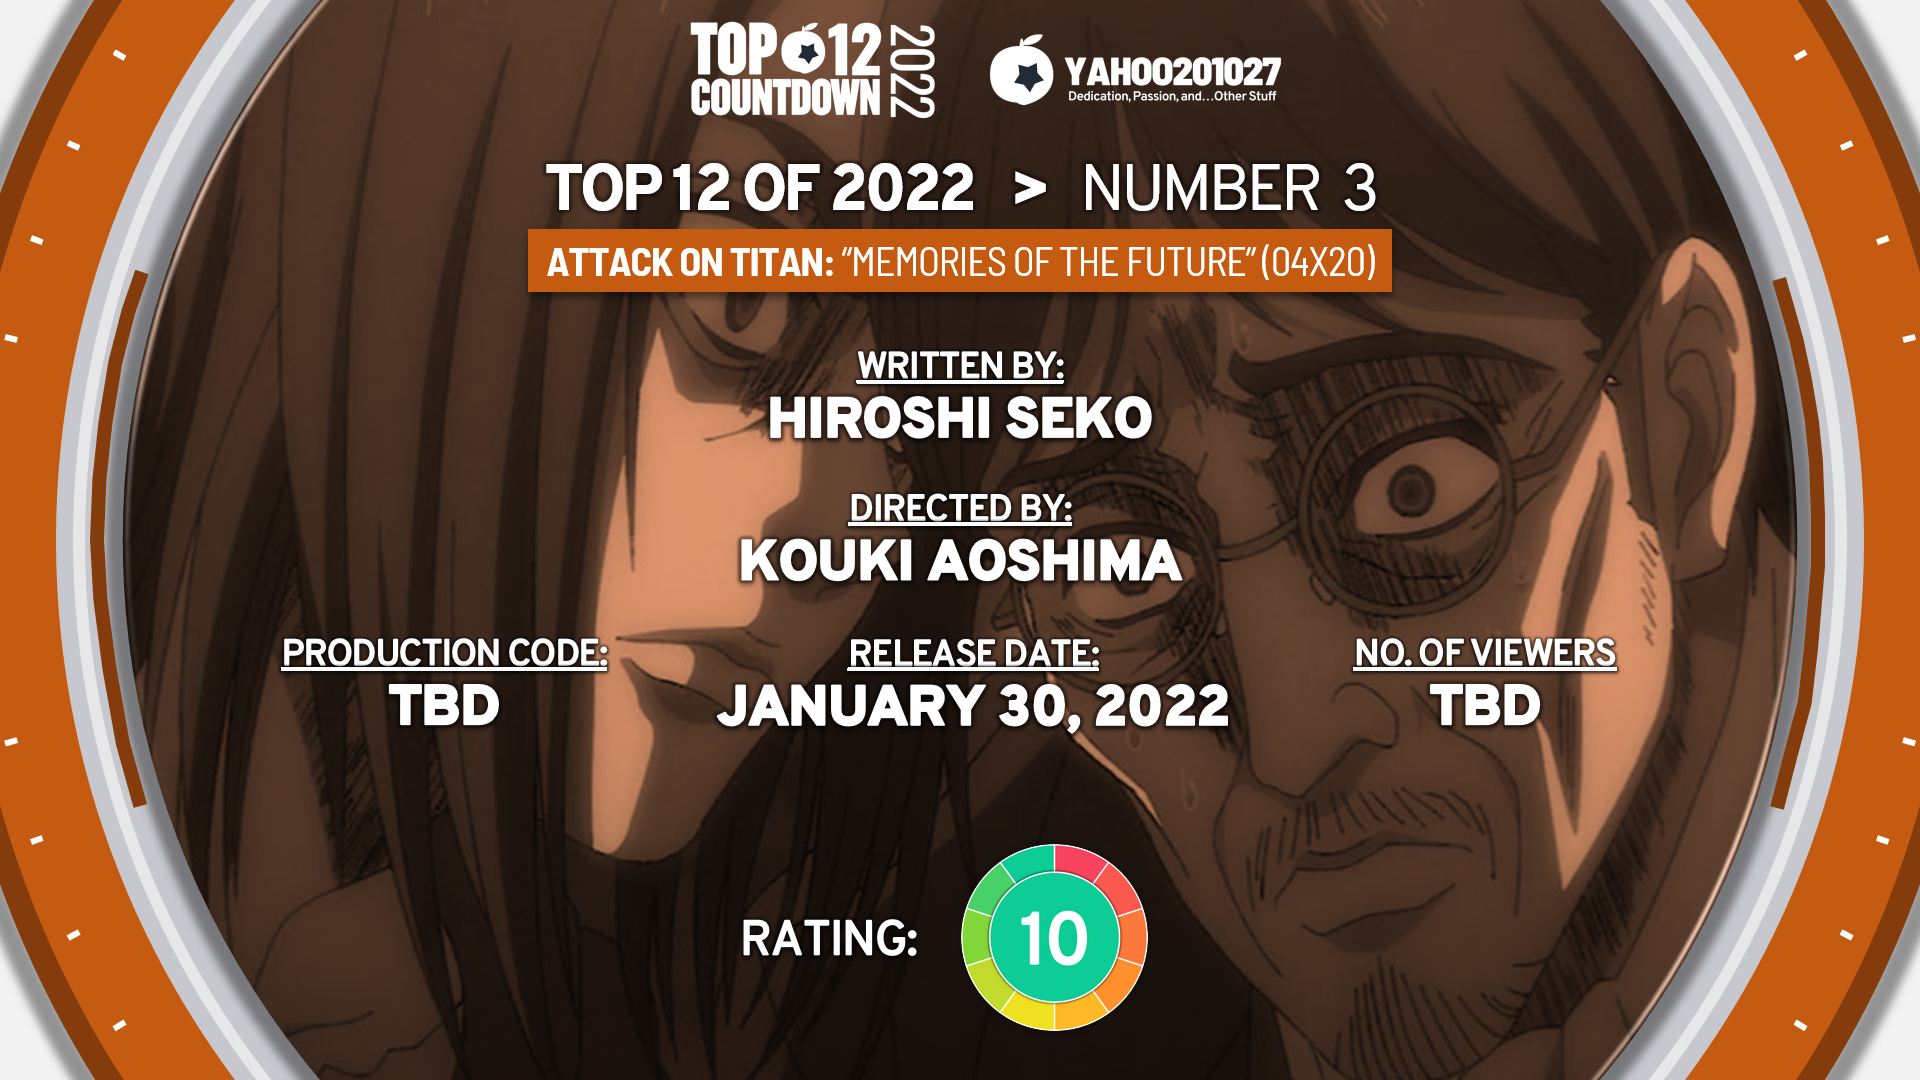 Number 3 of the Top 12 Countdown of 2022 – Attack on Titan 進撃の